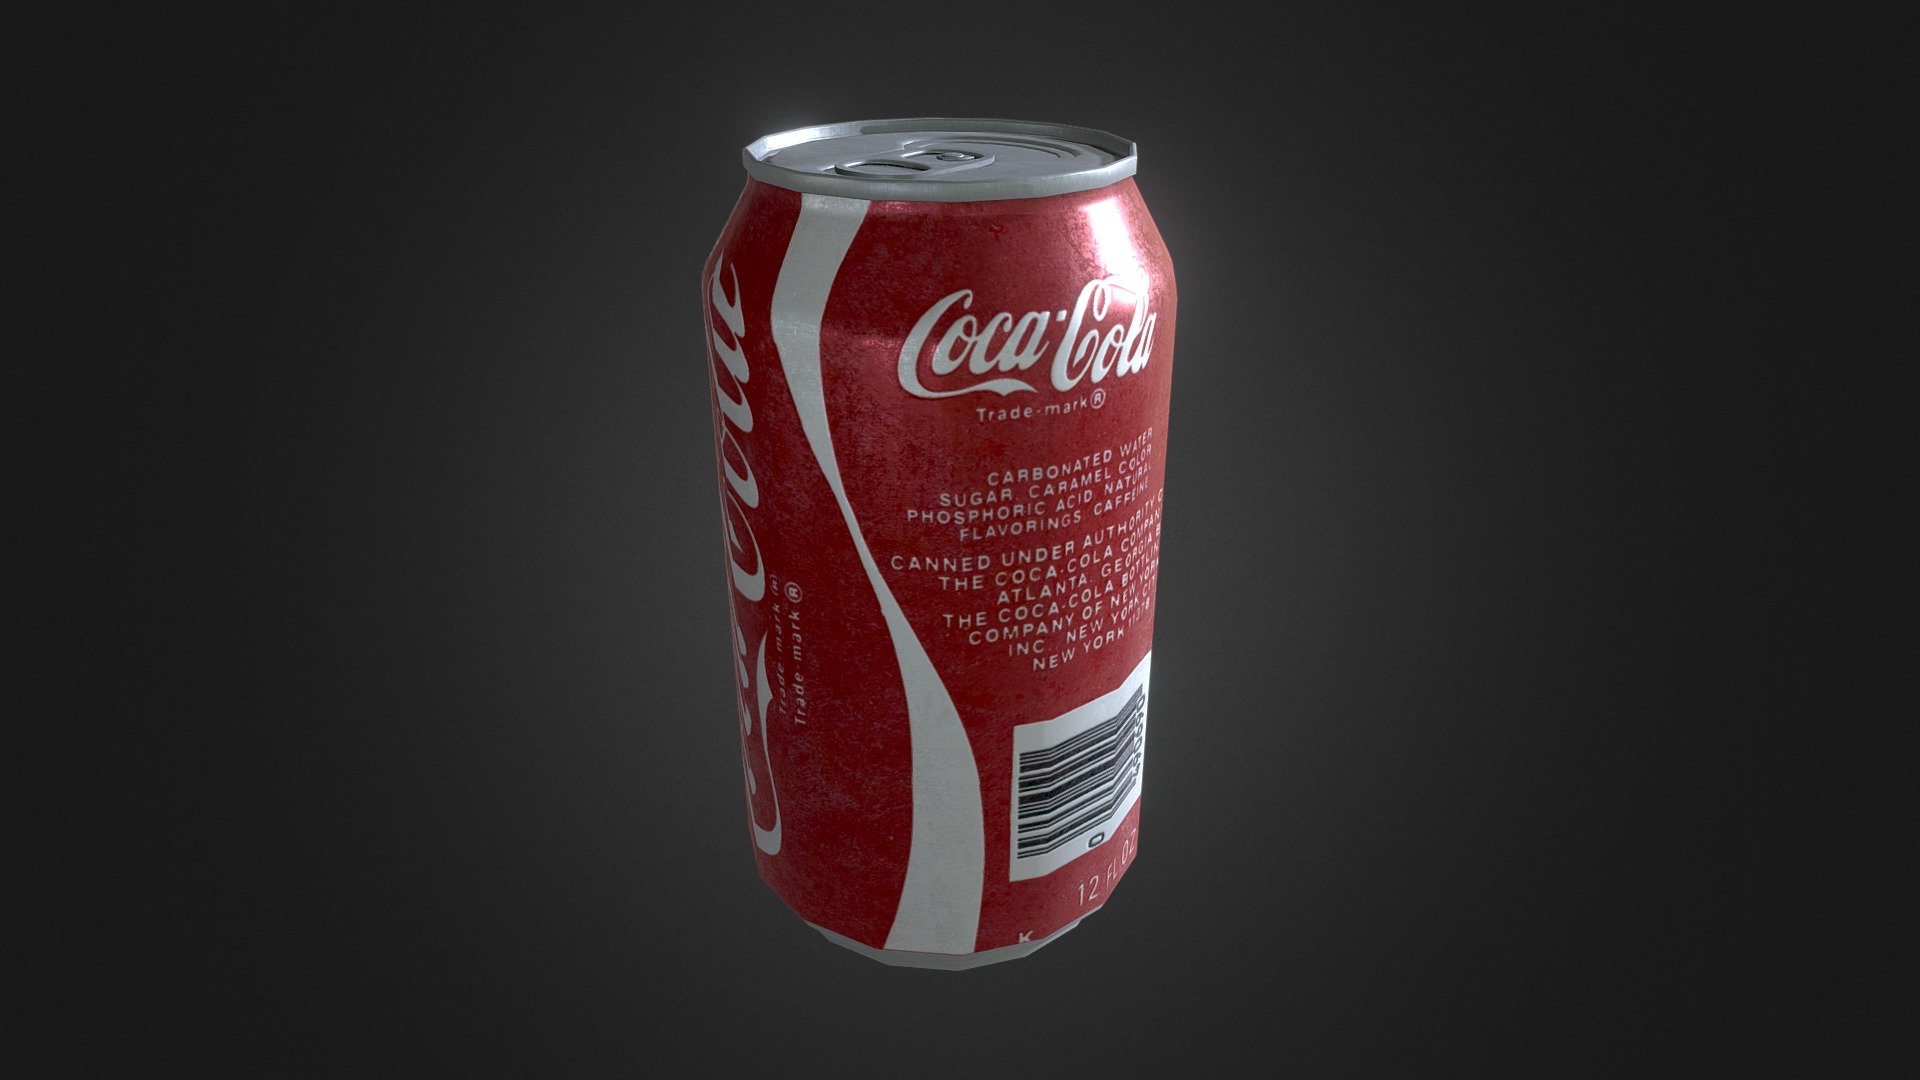 Here is another soda can i created, but this time with better detail. Took meh 3 hours but was worth it, hope you like it :P 3d model